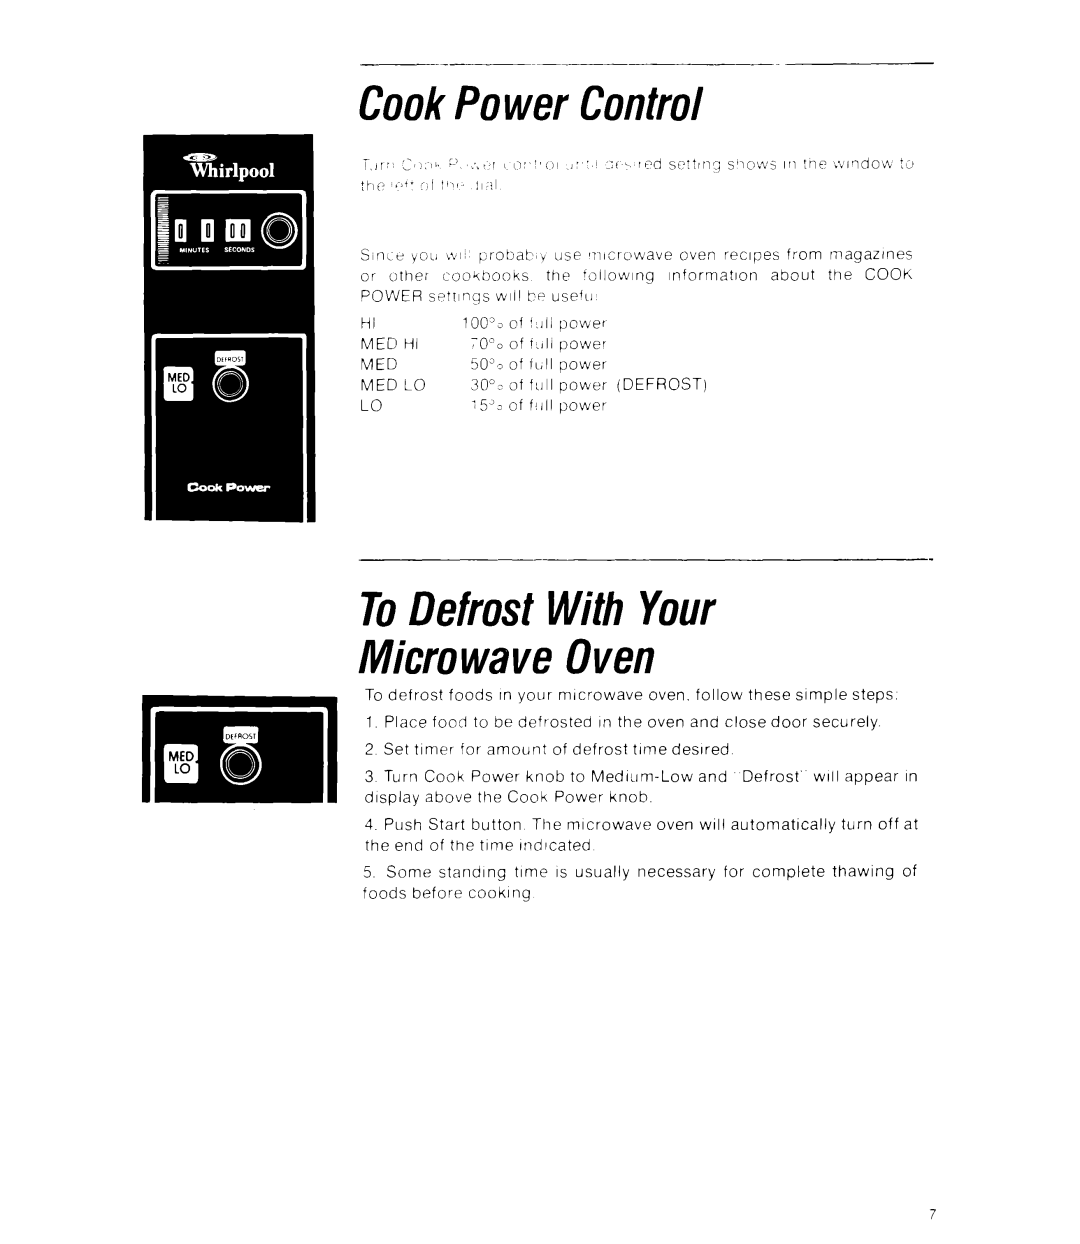 Whirlpool RJM 7500 manual CookPower Control, ToDefrostWith Your Microwave Oven 